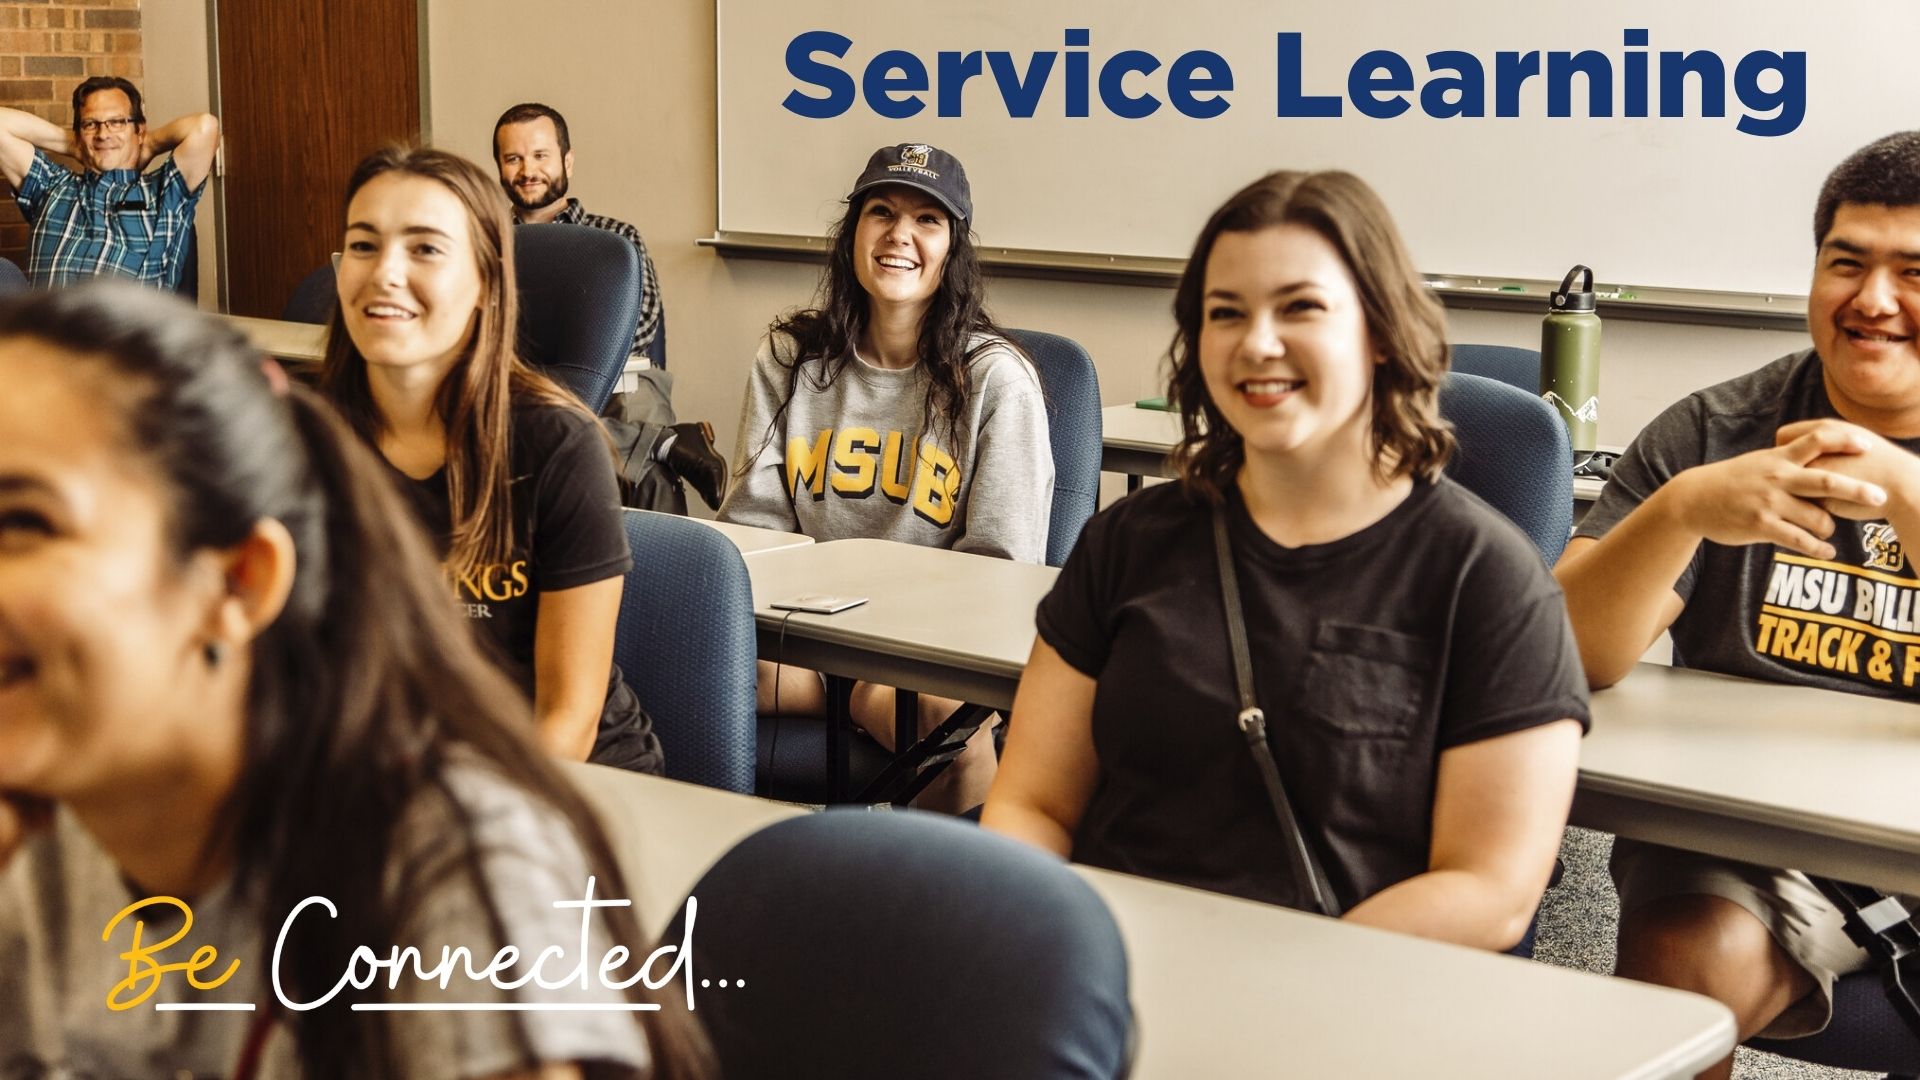 Service Learning. Be Connected.